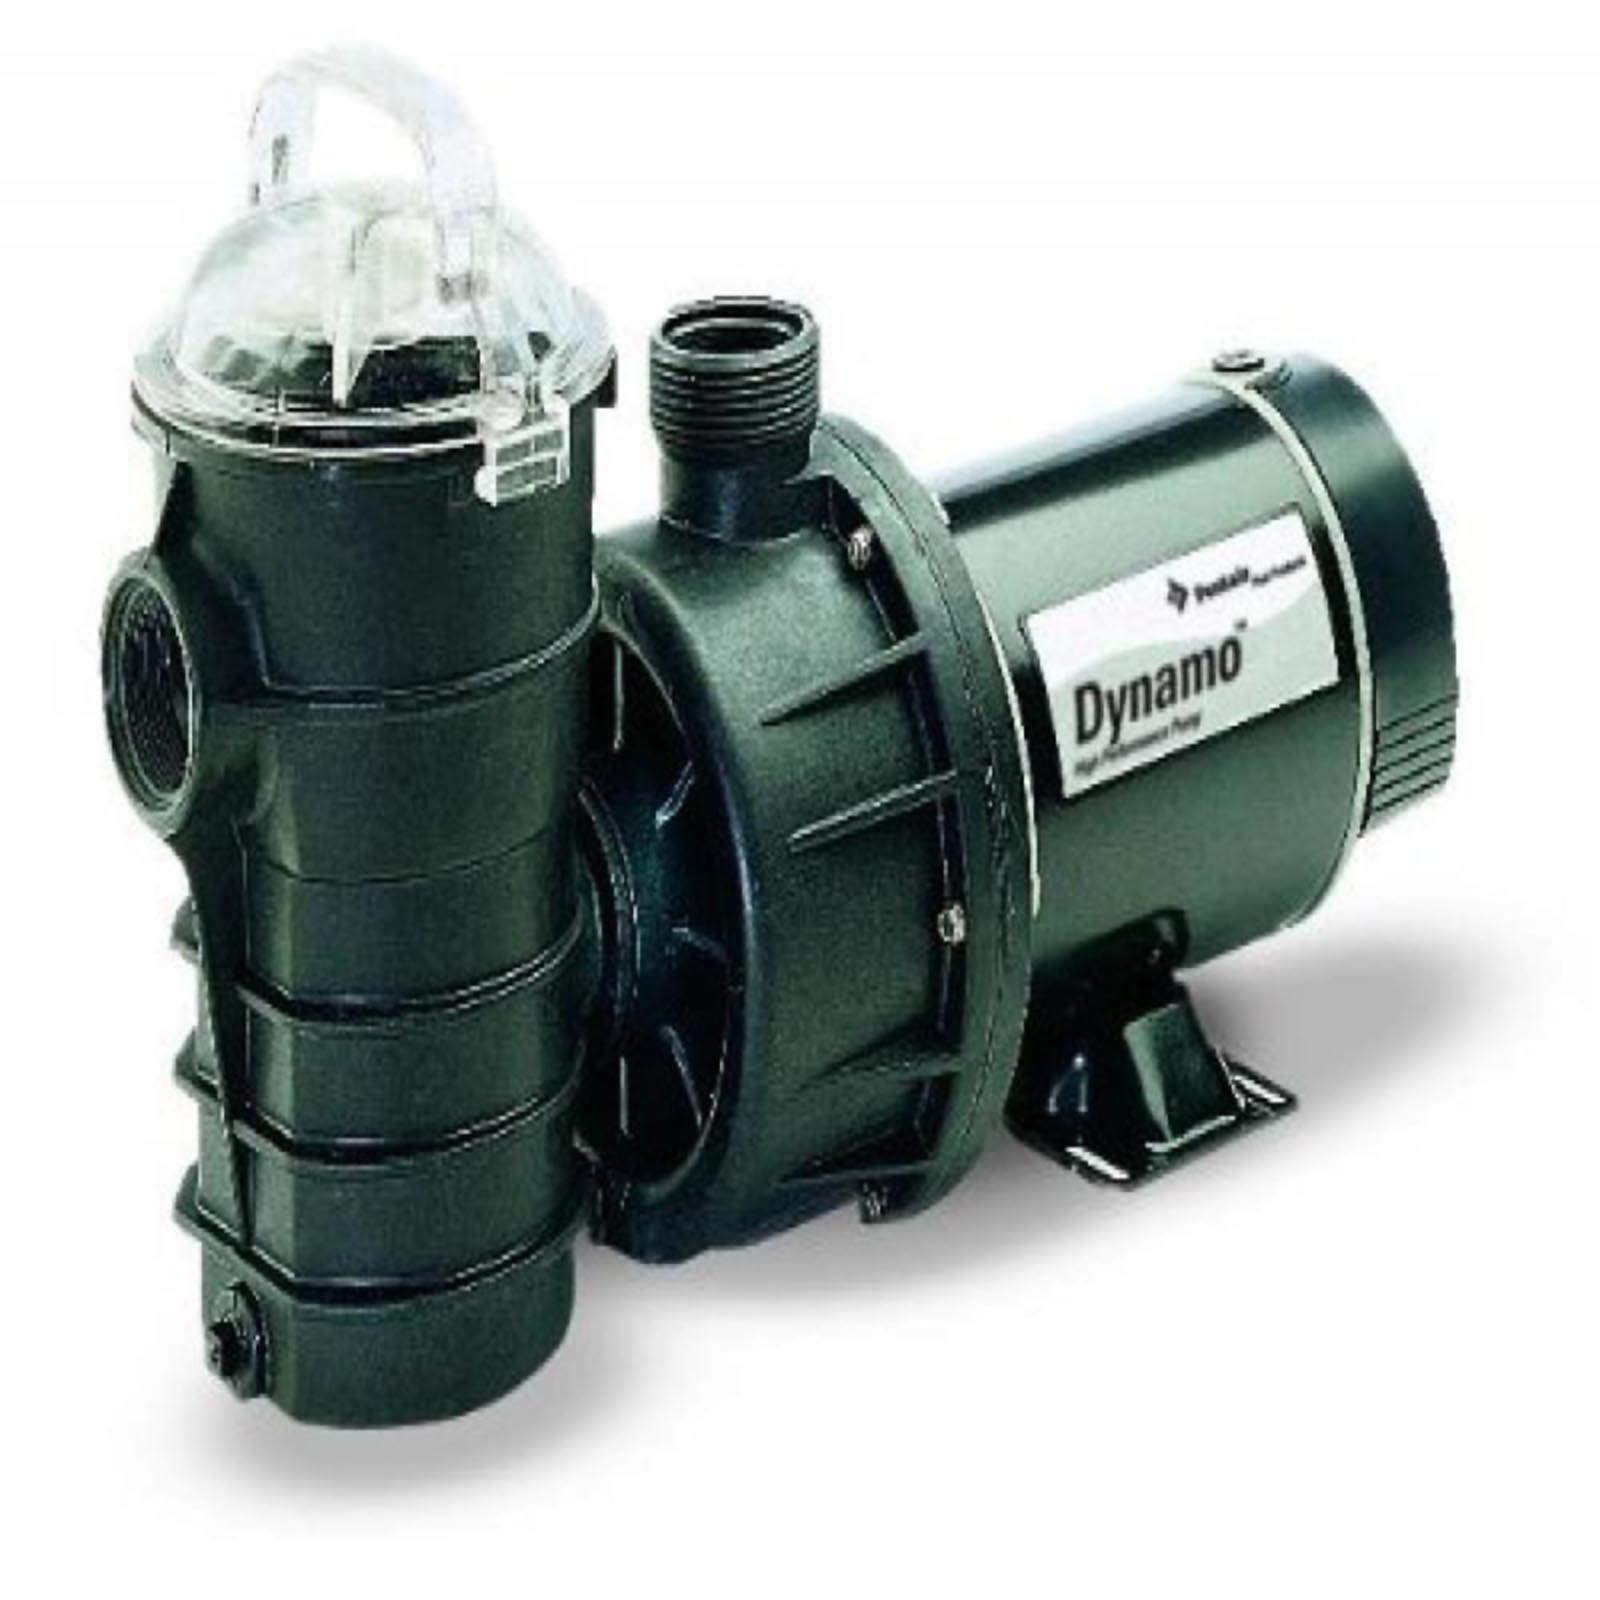 Pentair 340104 1HP Dynamo Pool Pump without Cord